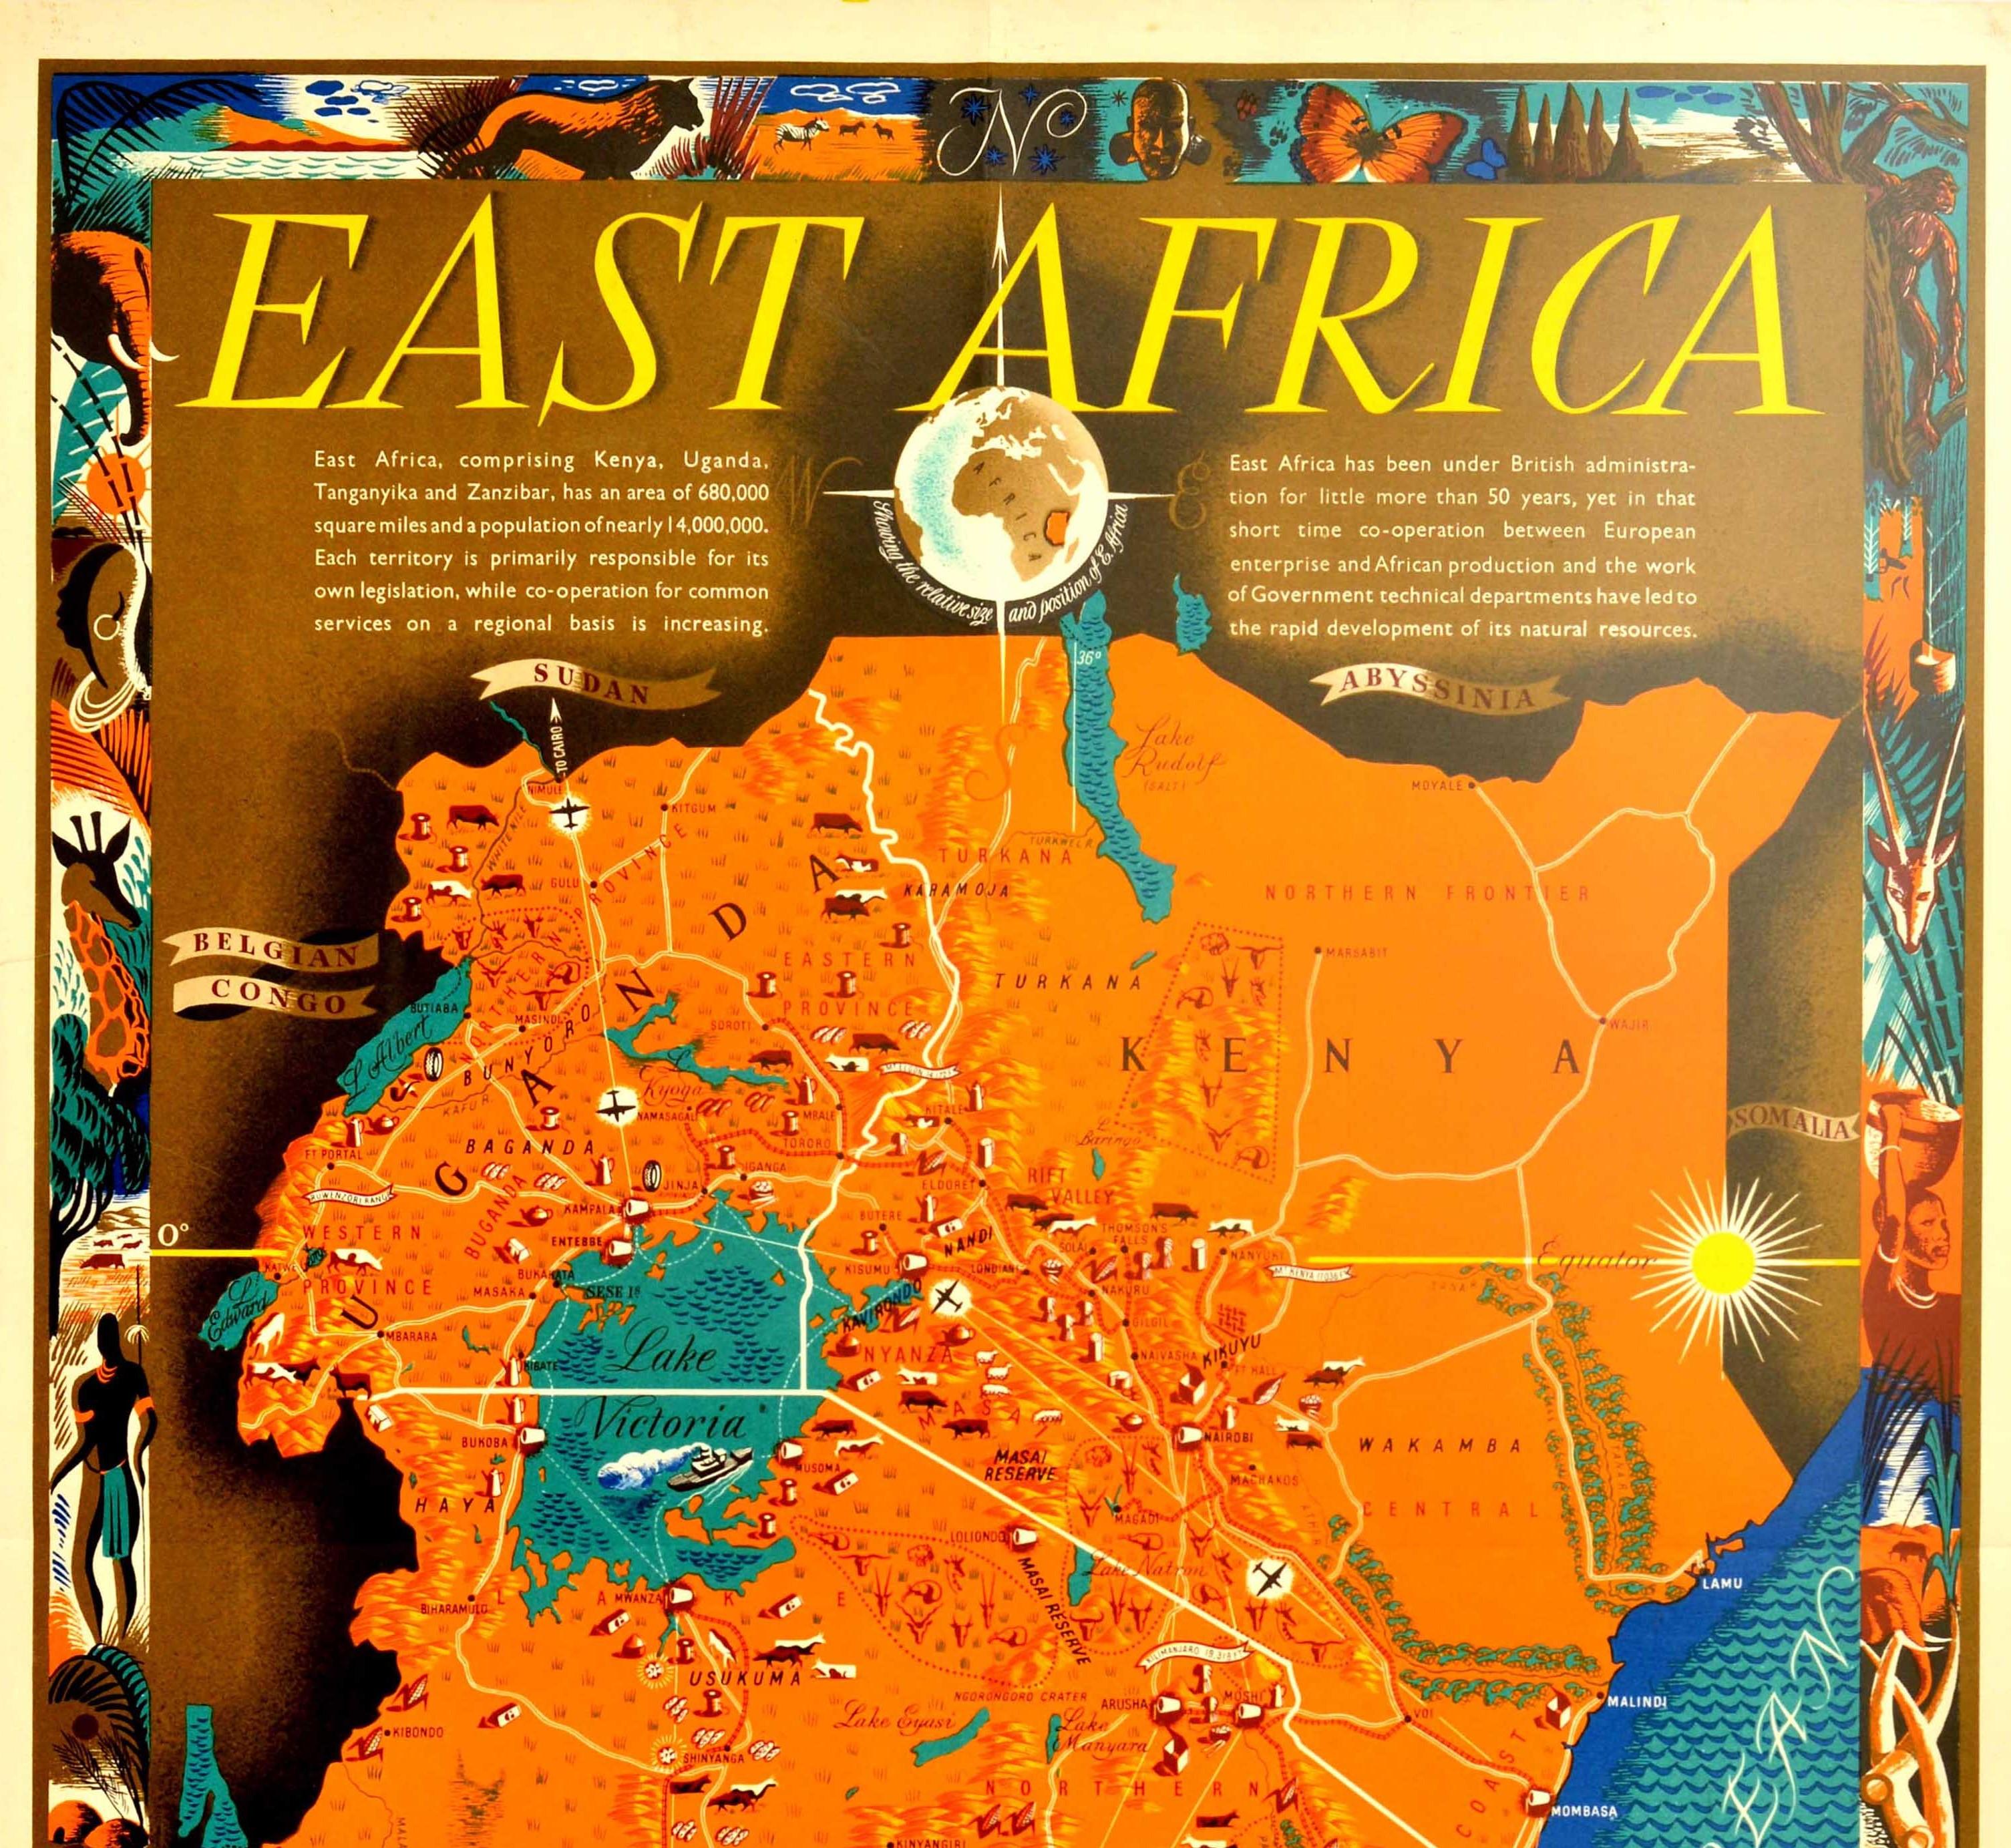 Original vintage poster map for East Africa with information on the British settlements and colonies in Uganda, Kenya, Tanganyika (Tanzania) and Zanzibar with a colourful map designed by the New Zealand artist, printer, typographer, publisher and